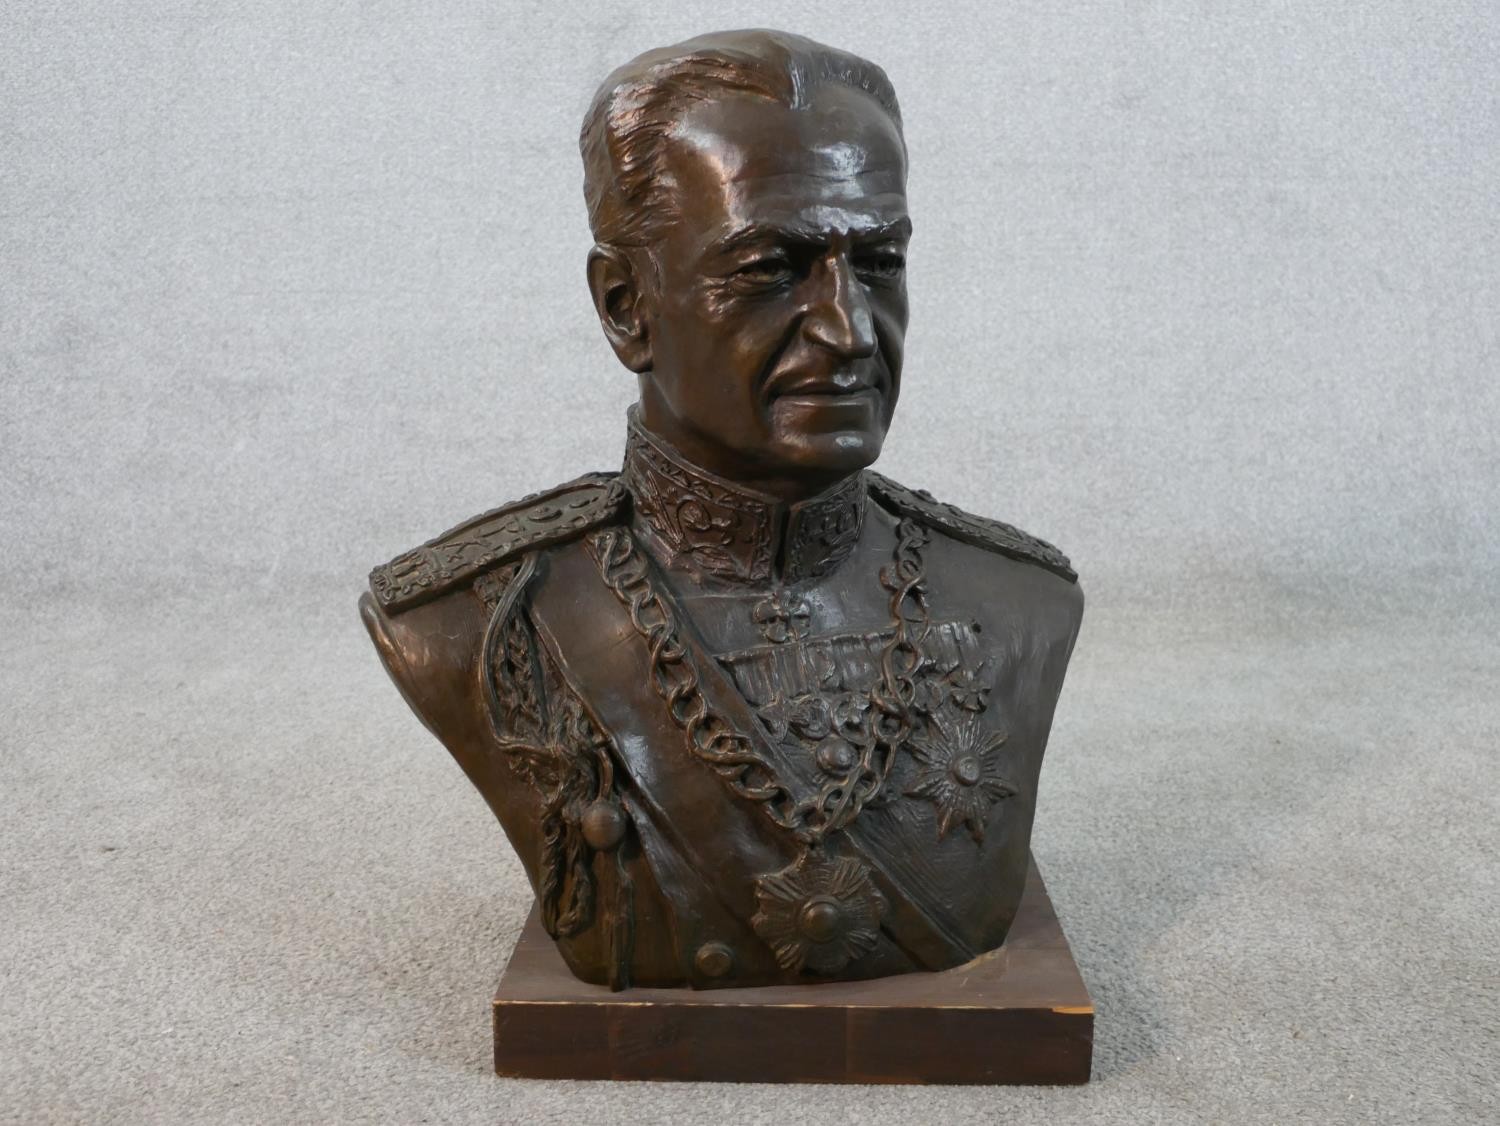 A cast bronze portrait bust of Persian Shah Mohammad Reza Pahlavi in military uniform, mounted on